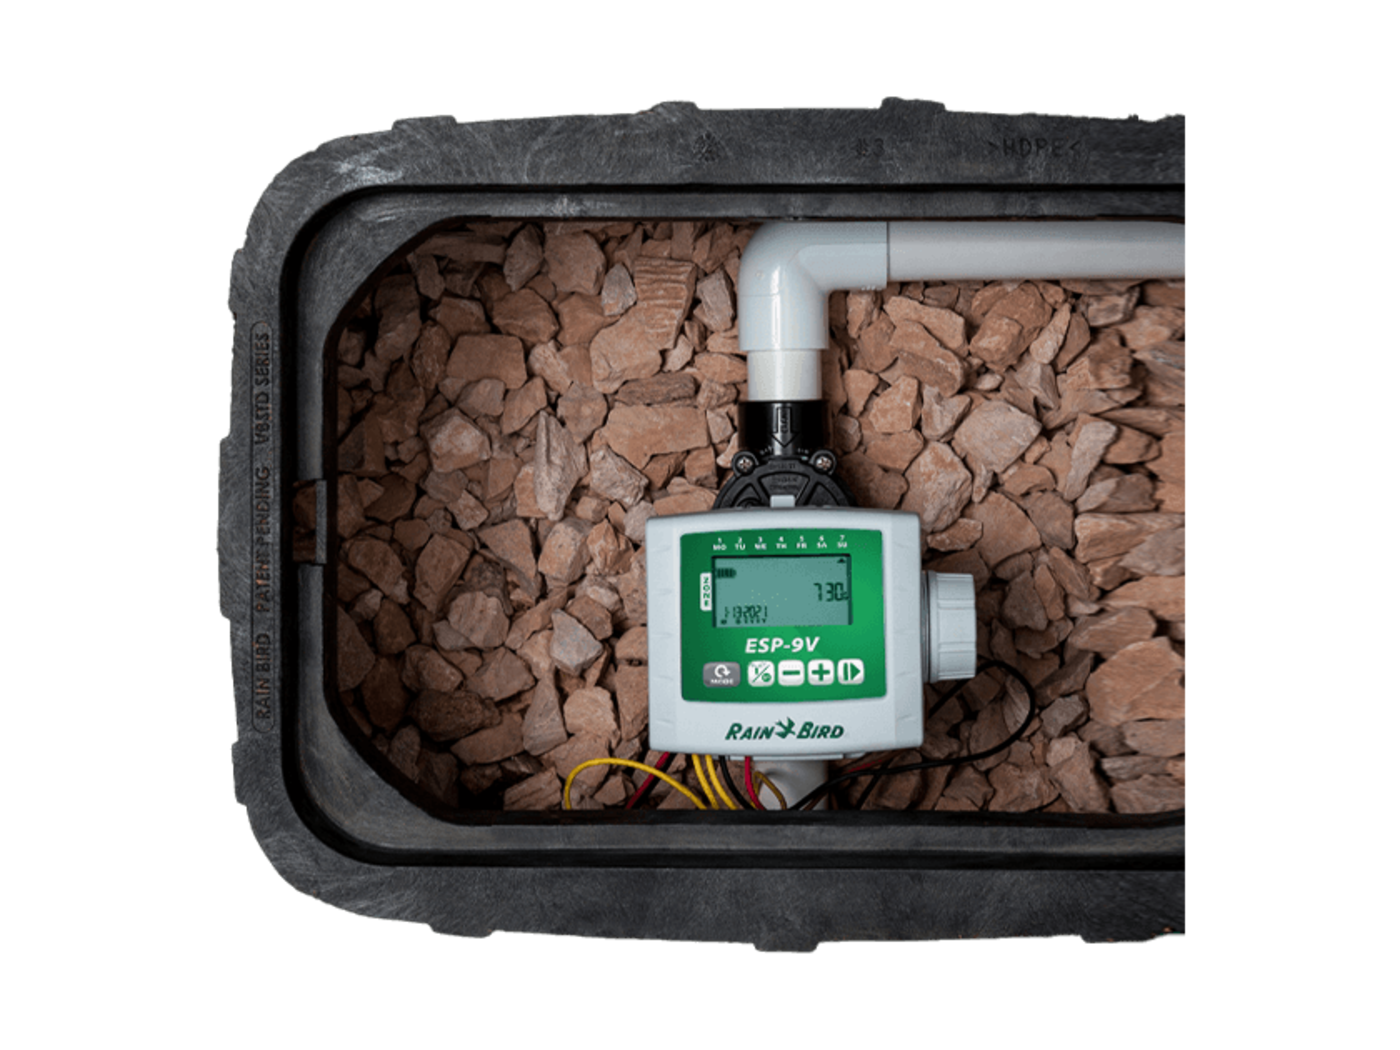 Rain Bird ESP-9V battery-operated irrigation controller hooked up to irrigation system